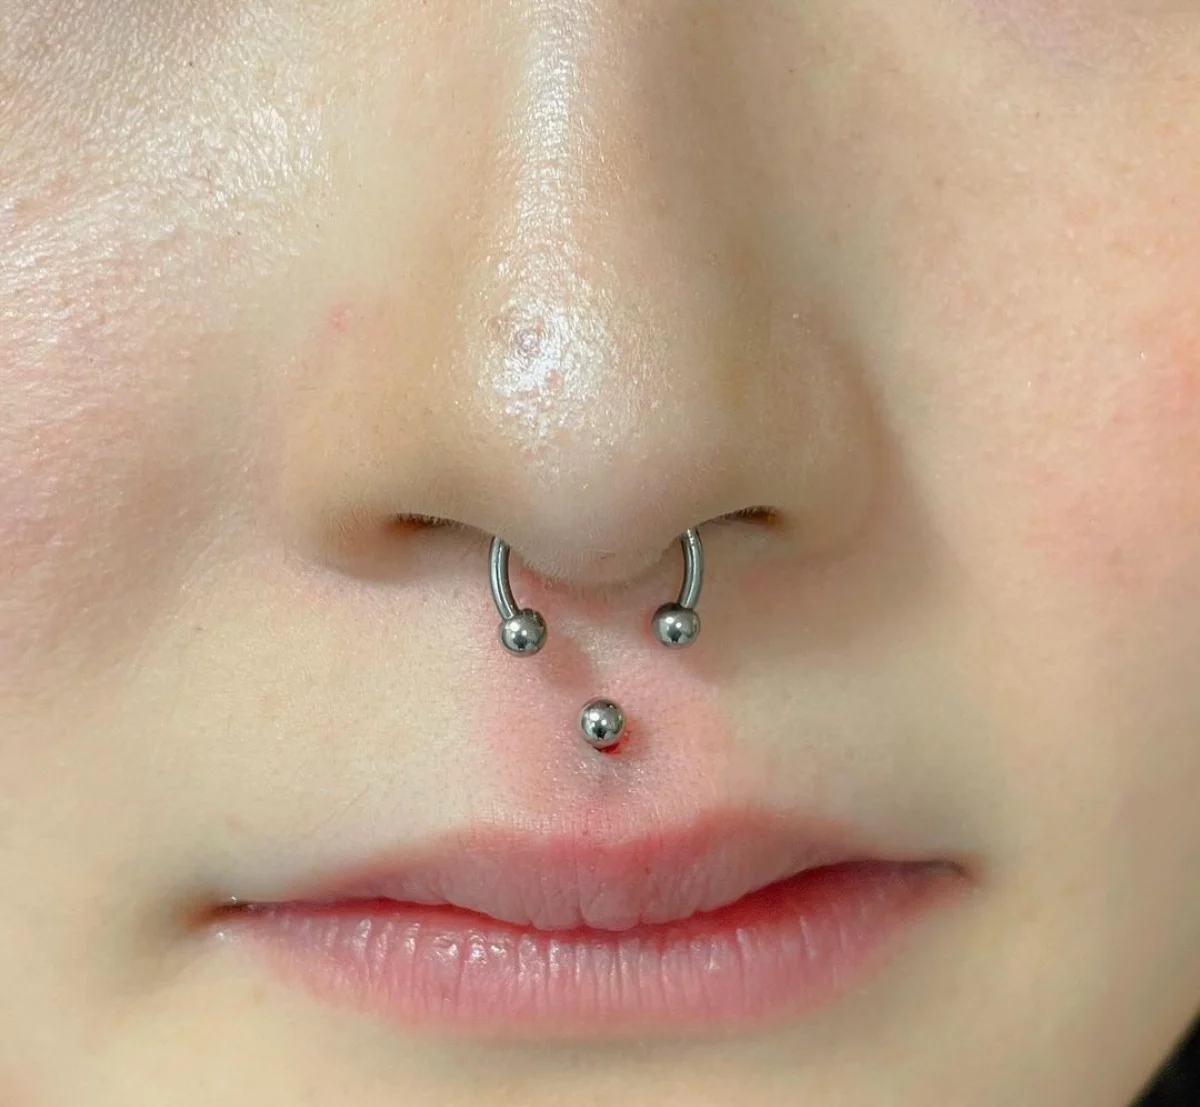 5 nose and face piercing